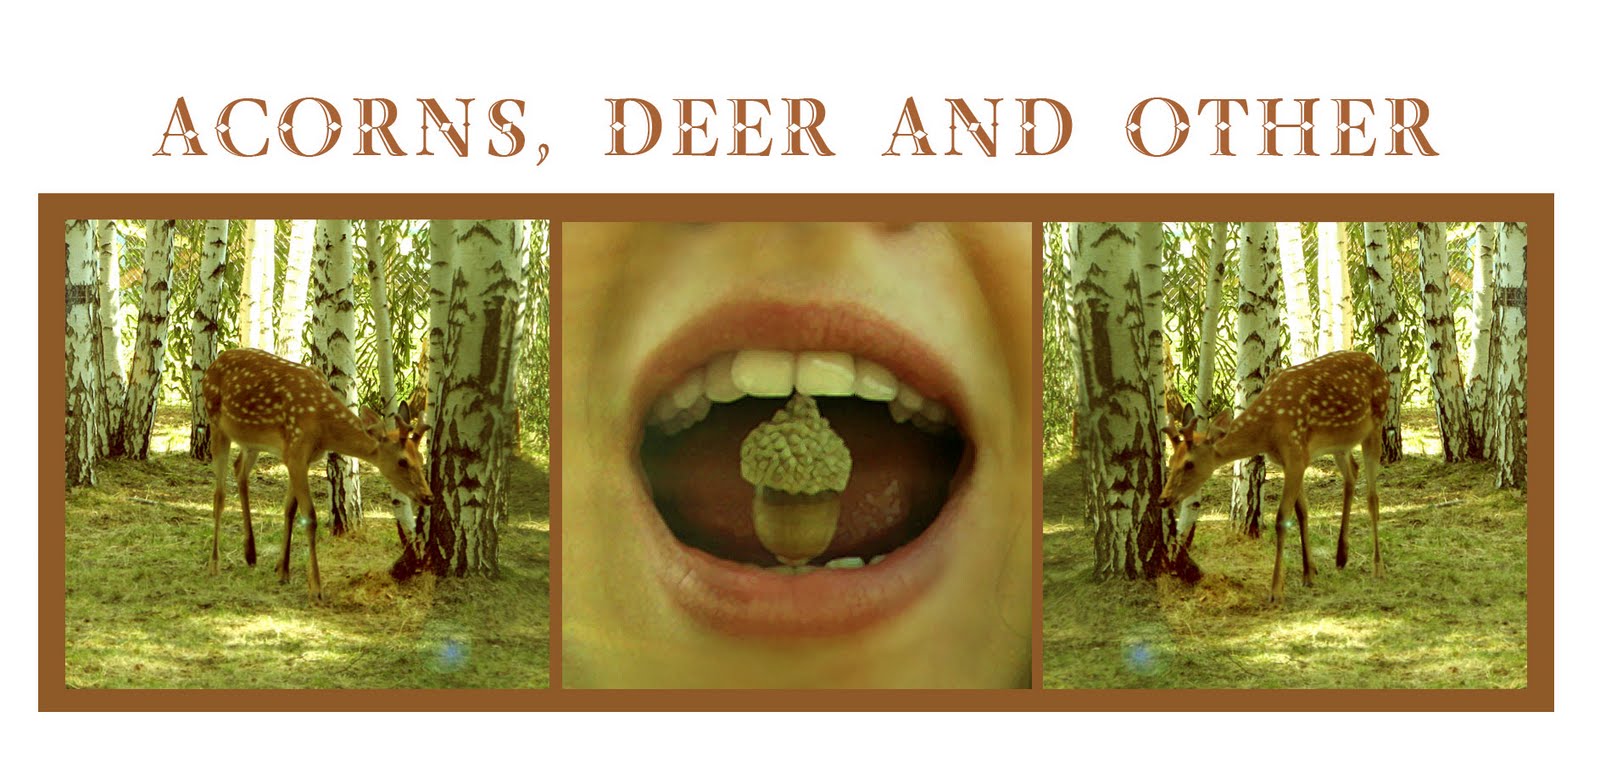 Acorns, deer and other